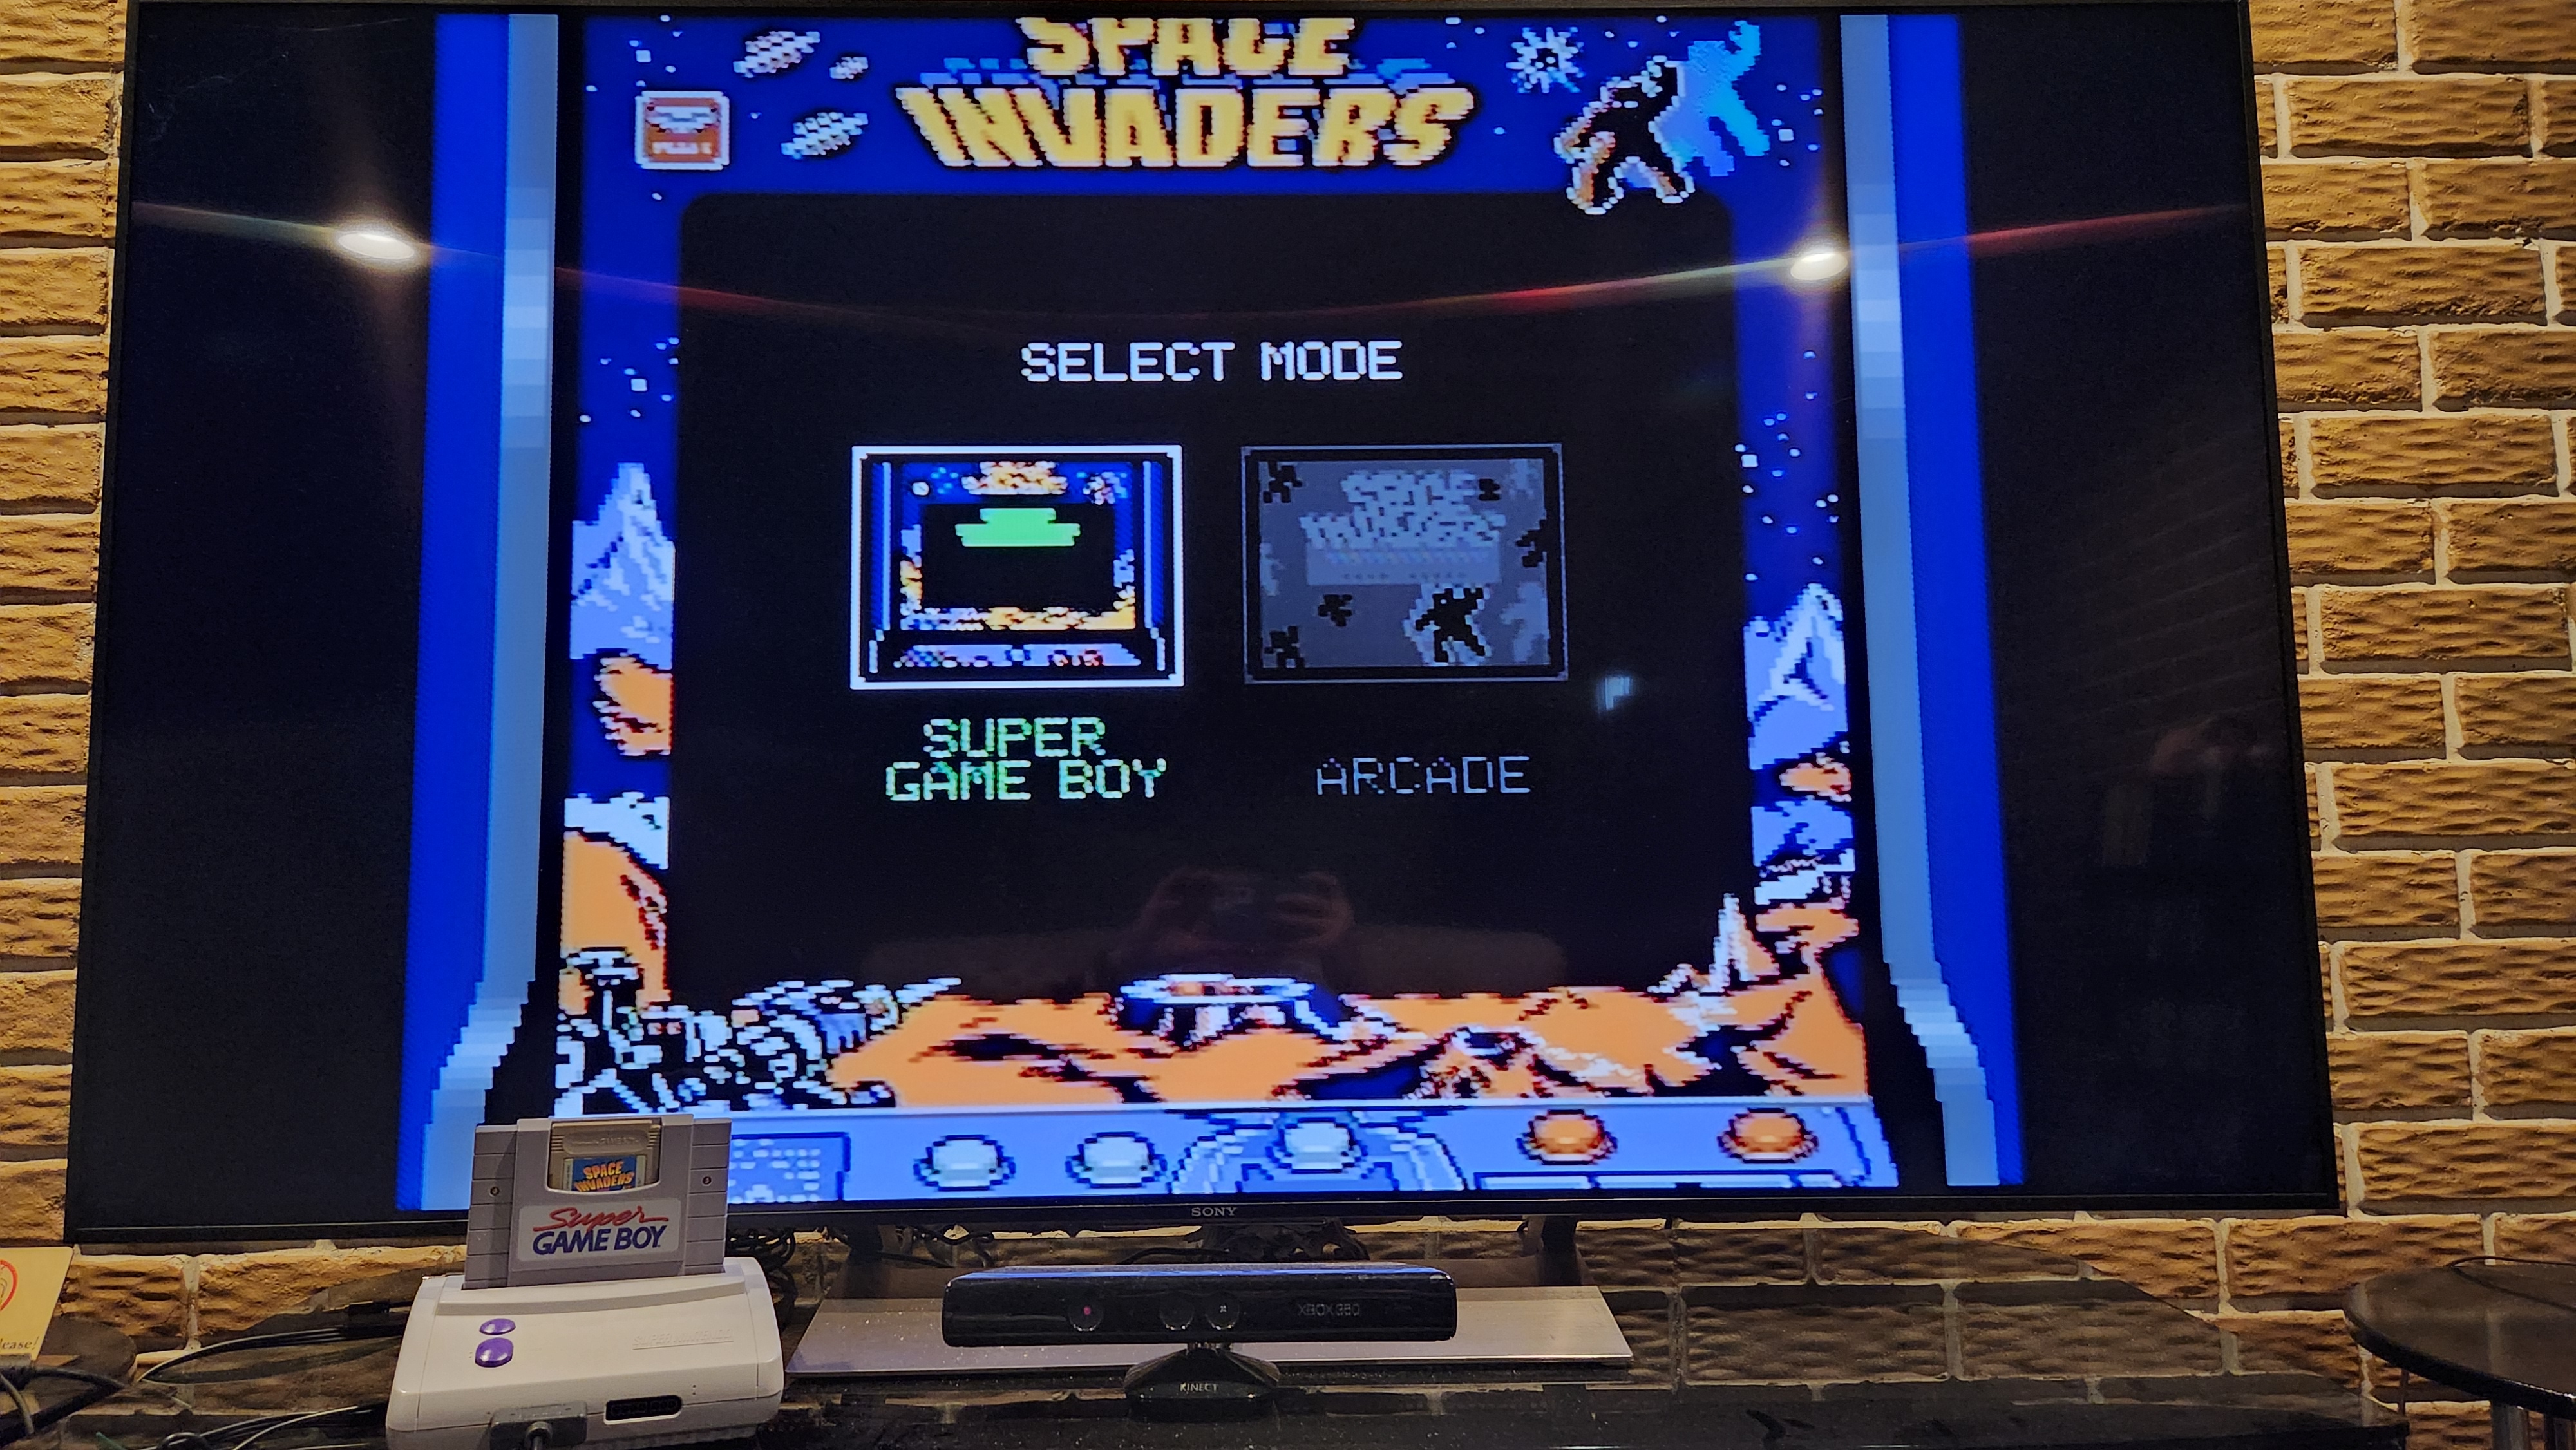 Game selection of Space Invaders